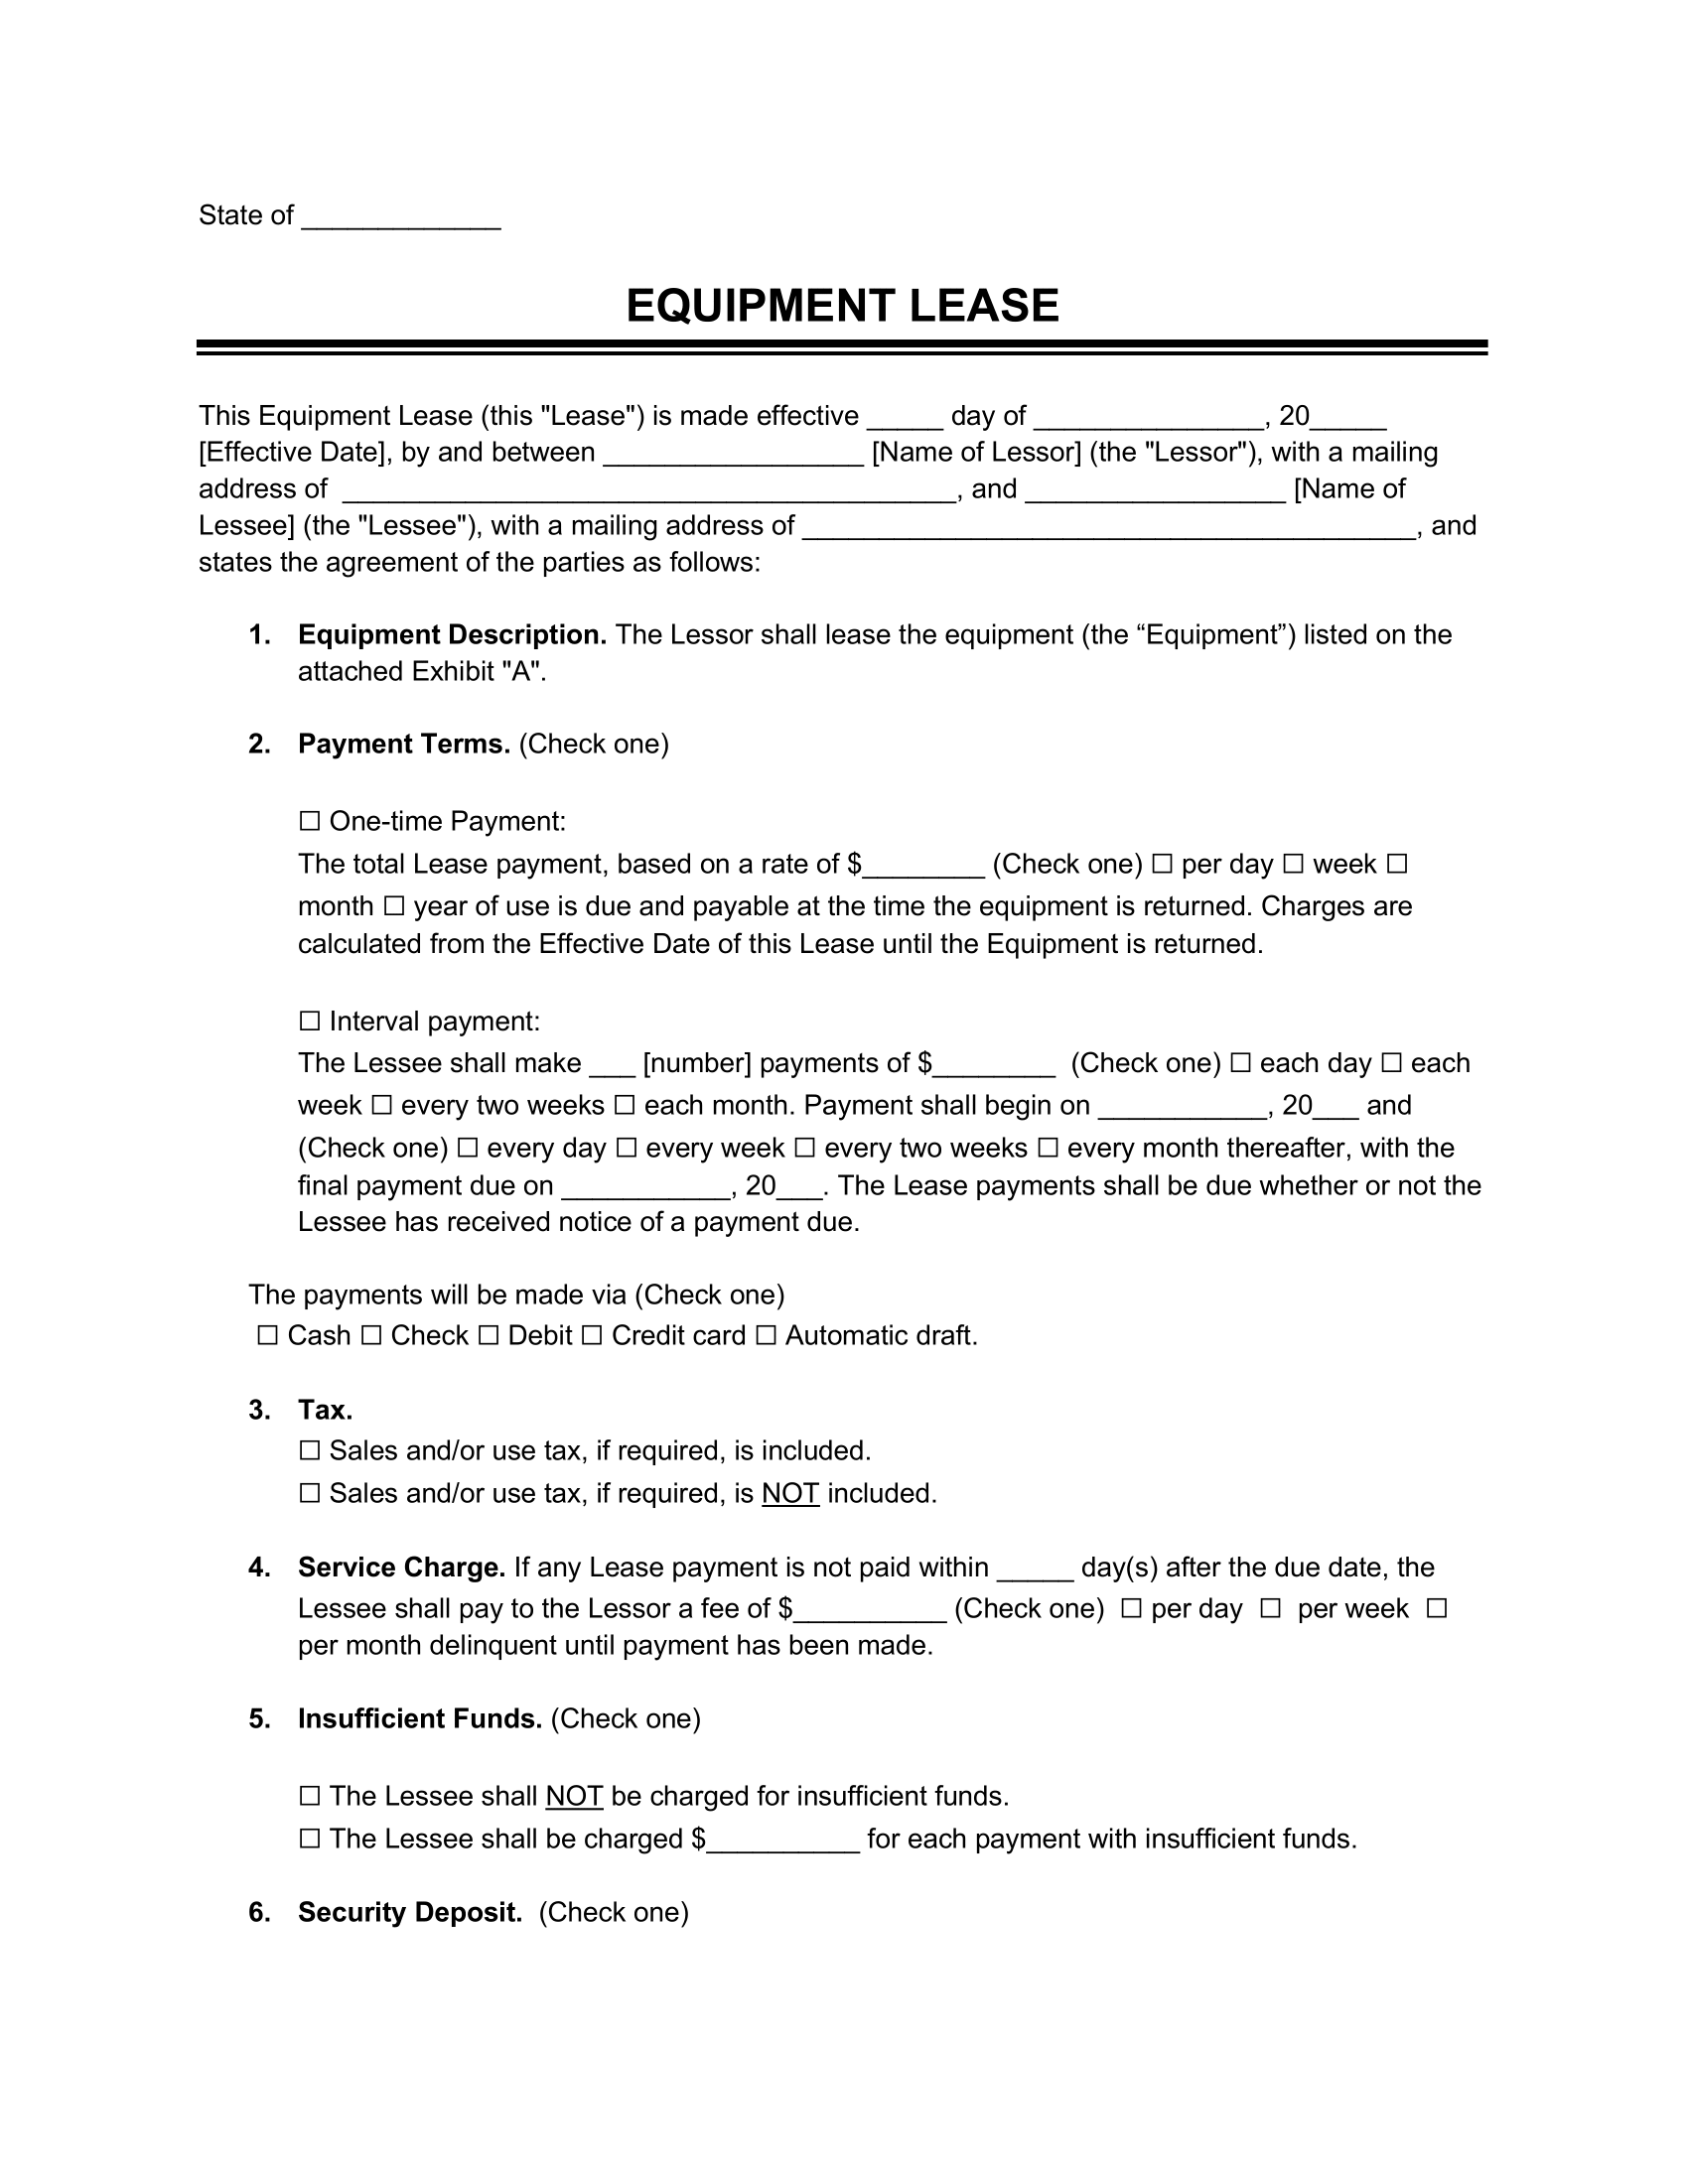 equipment lease assignment